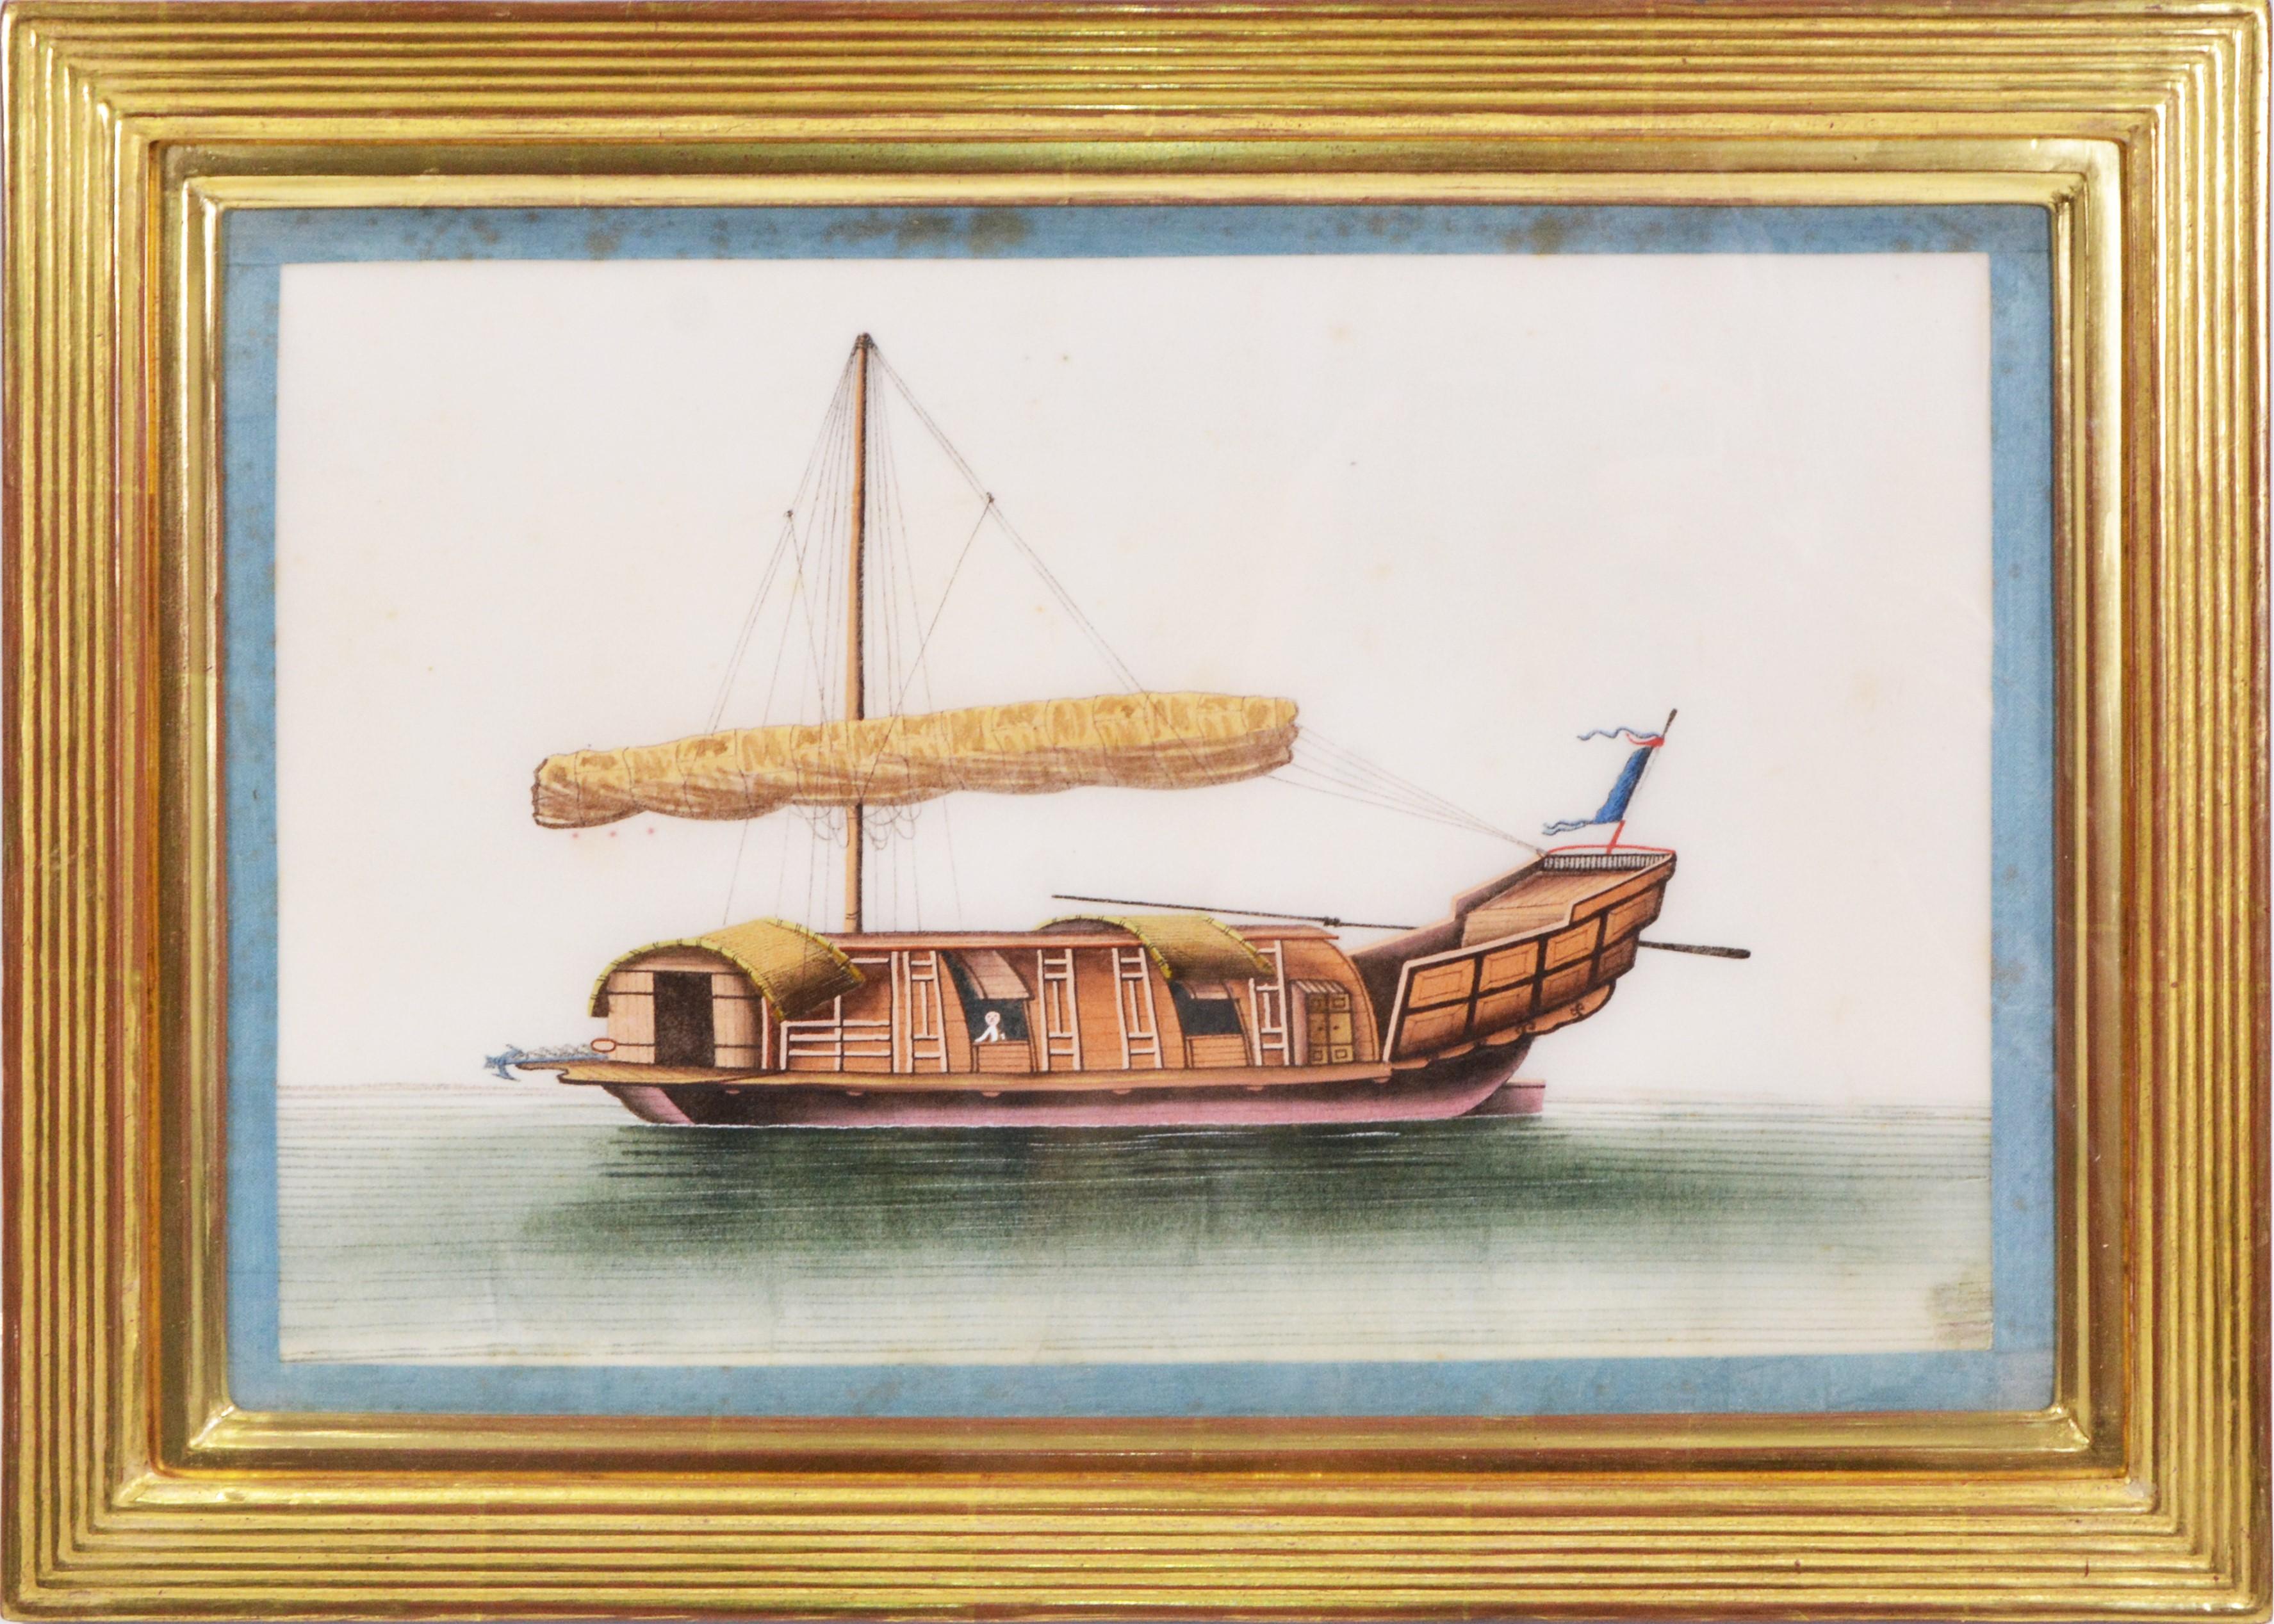 [China Export Water-colours on Pith Paper].
A Group of Twelve Chinese Junks and Barges.
c. 1860.

Water-colour and gouache studies on pith paper, edged in blue silk ribbon.

The vessels depicted include variants of the traditional flat-bottomed